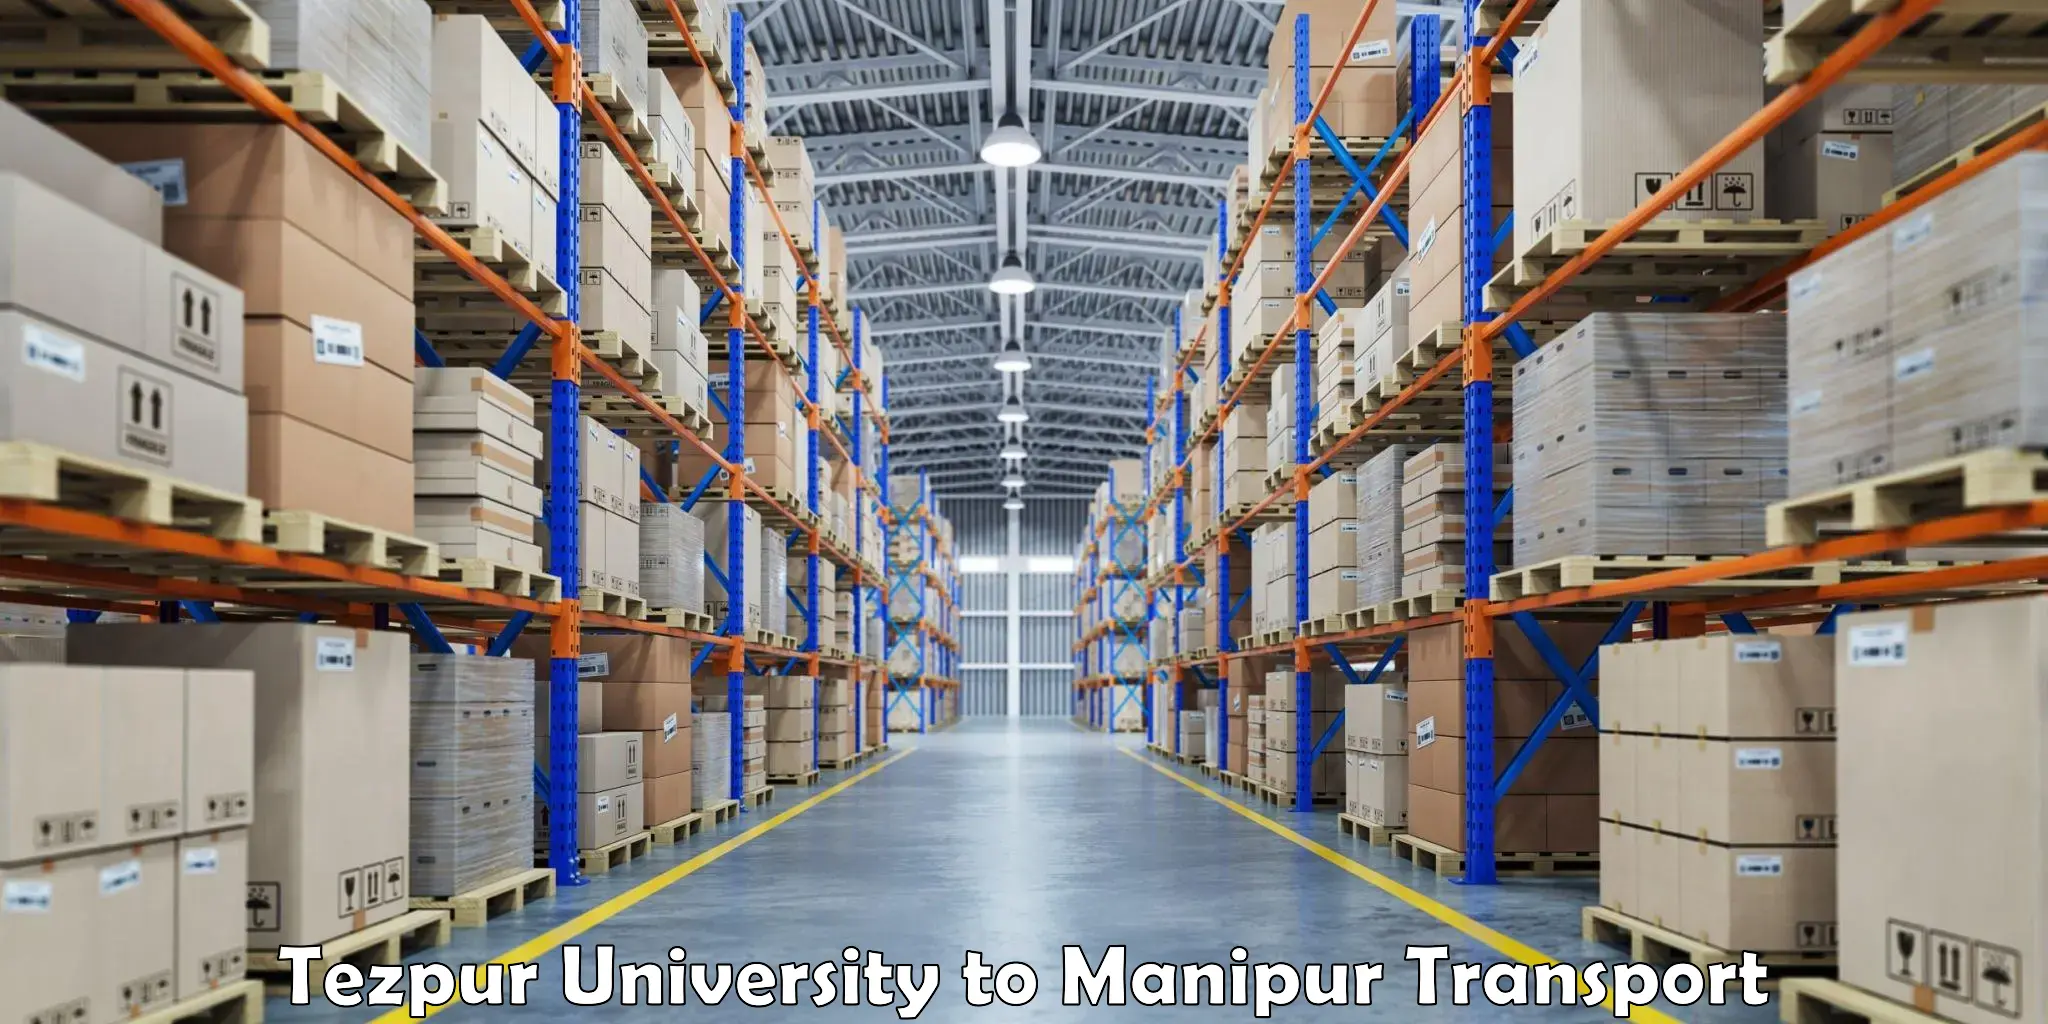 Container transport service Tezpur University to Moirang